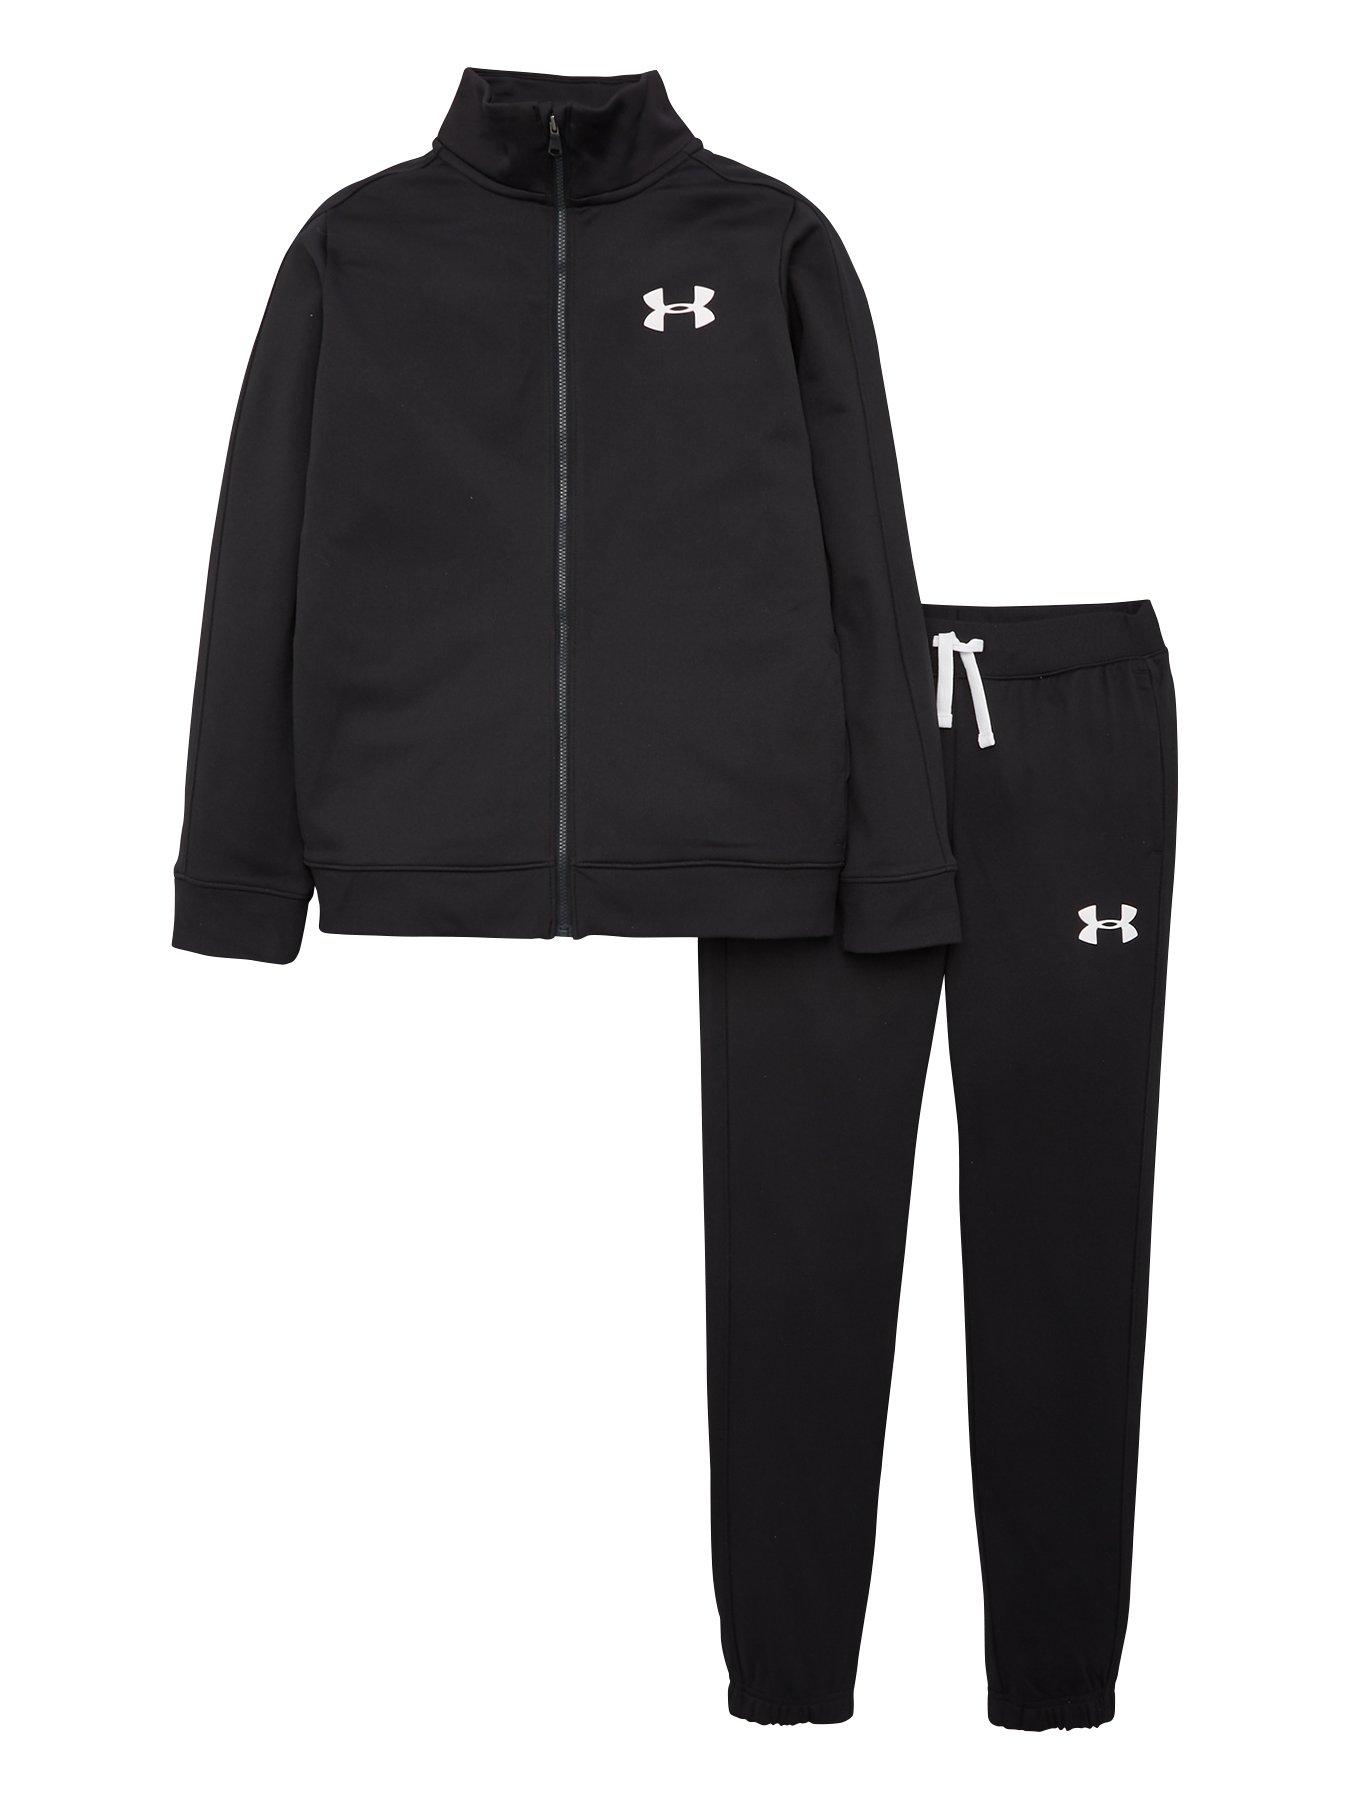 Under armour | Tracksuits | Kids \u0026 baby 